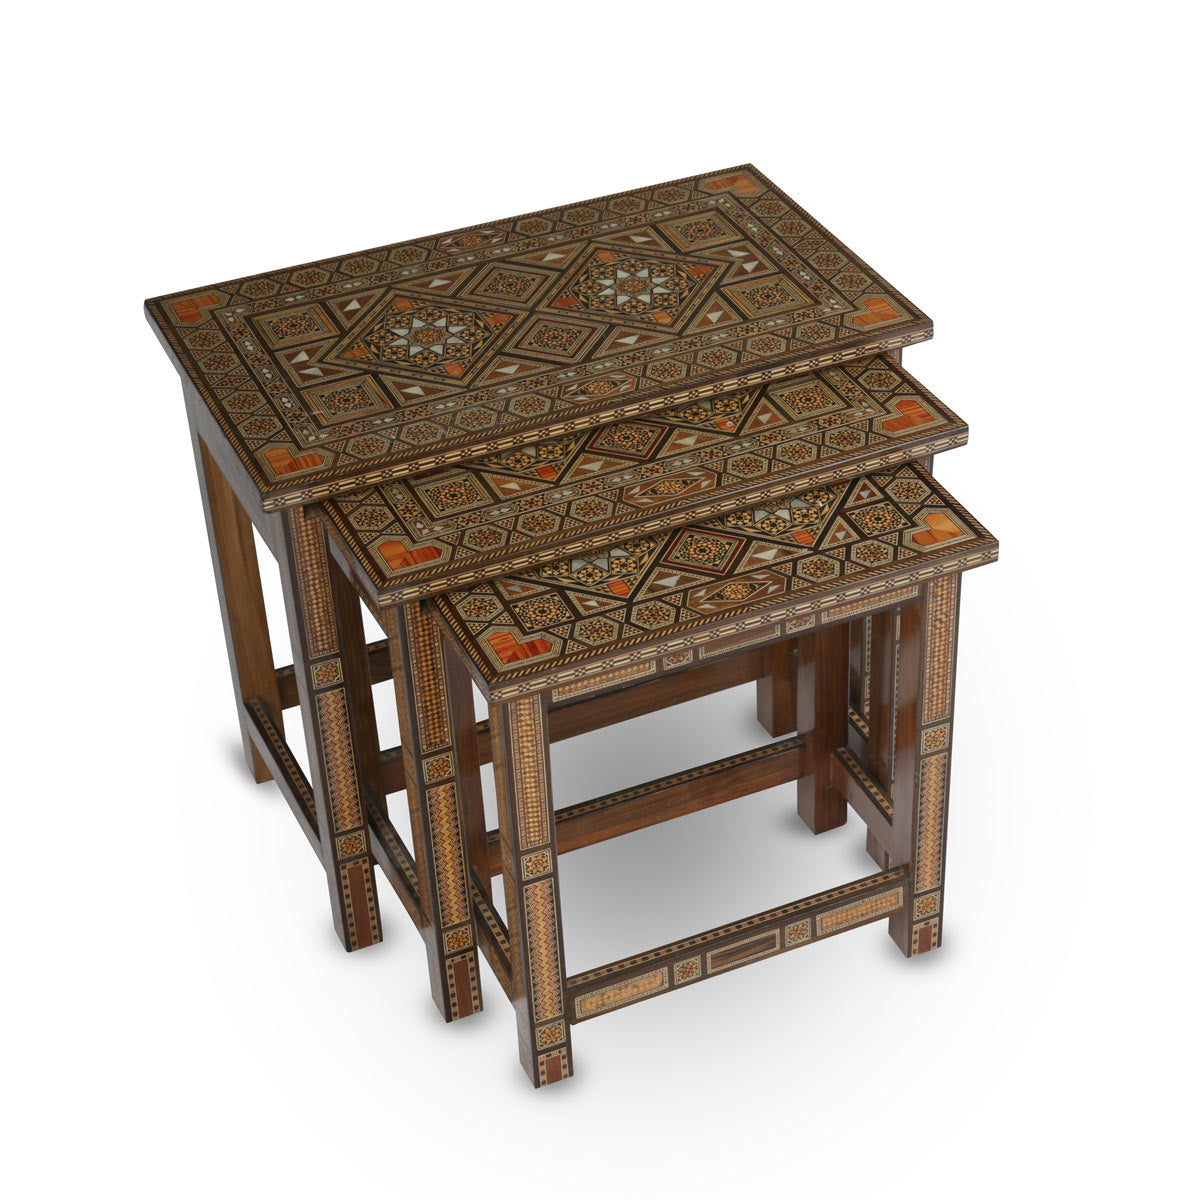 Angled Top View of Mosaic Wood Nested Syrian Designer Tables